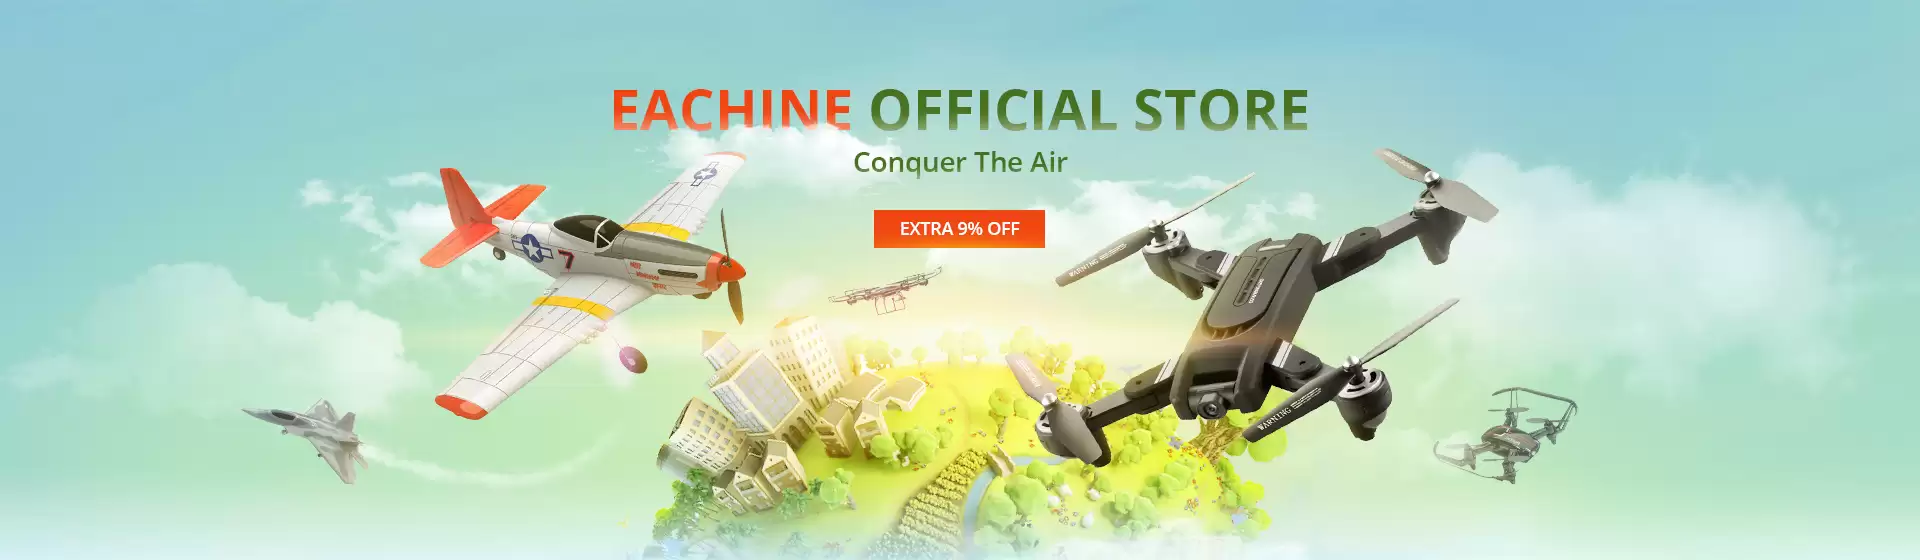 Take Extra 9% Discount On Eachine Official Store With This Coupon At Banggood